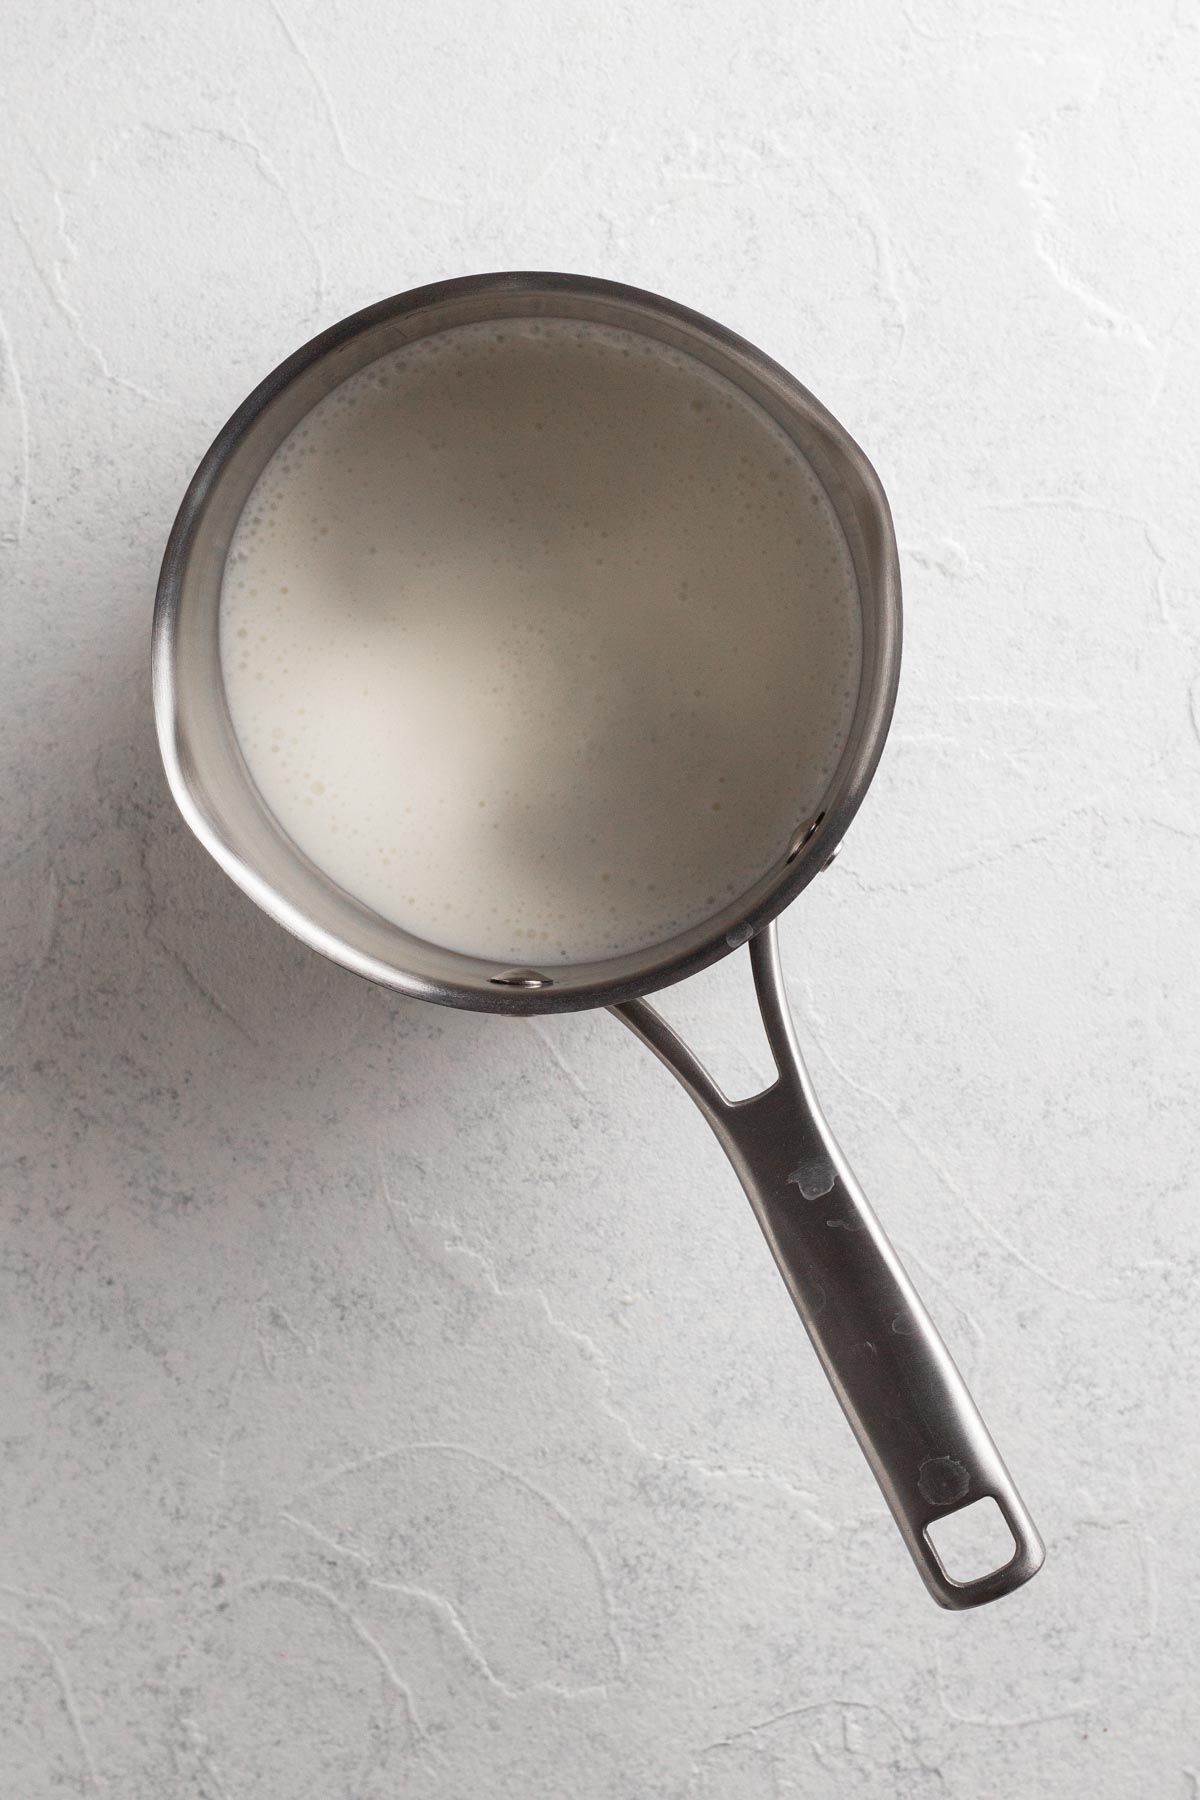 Simmering cream in a metal saucepan on a white surface.